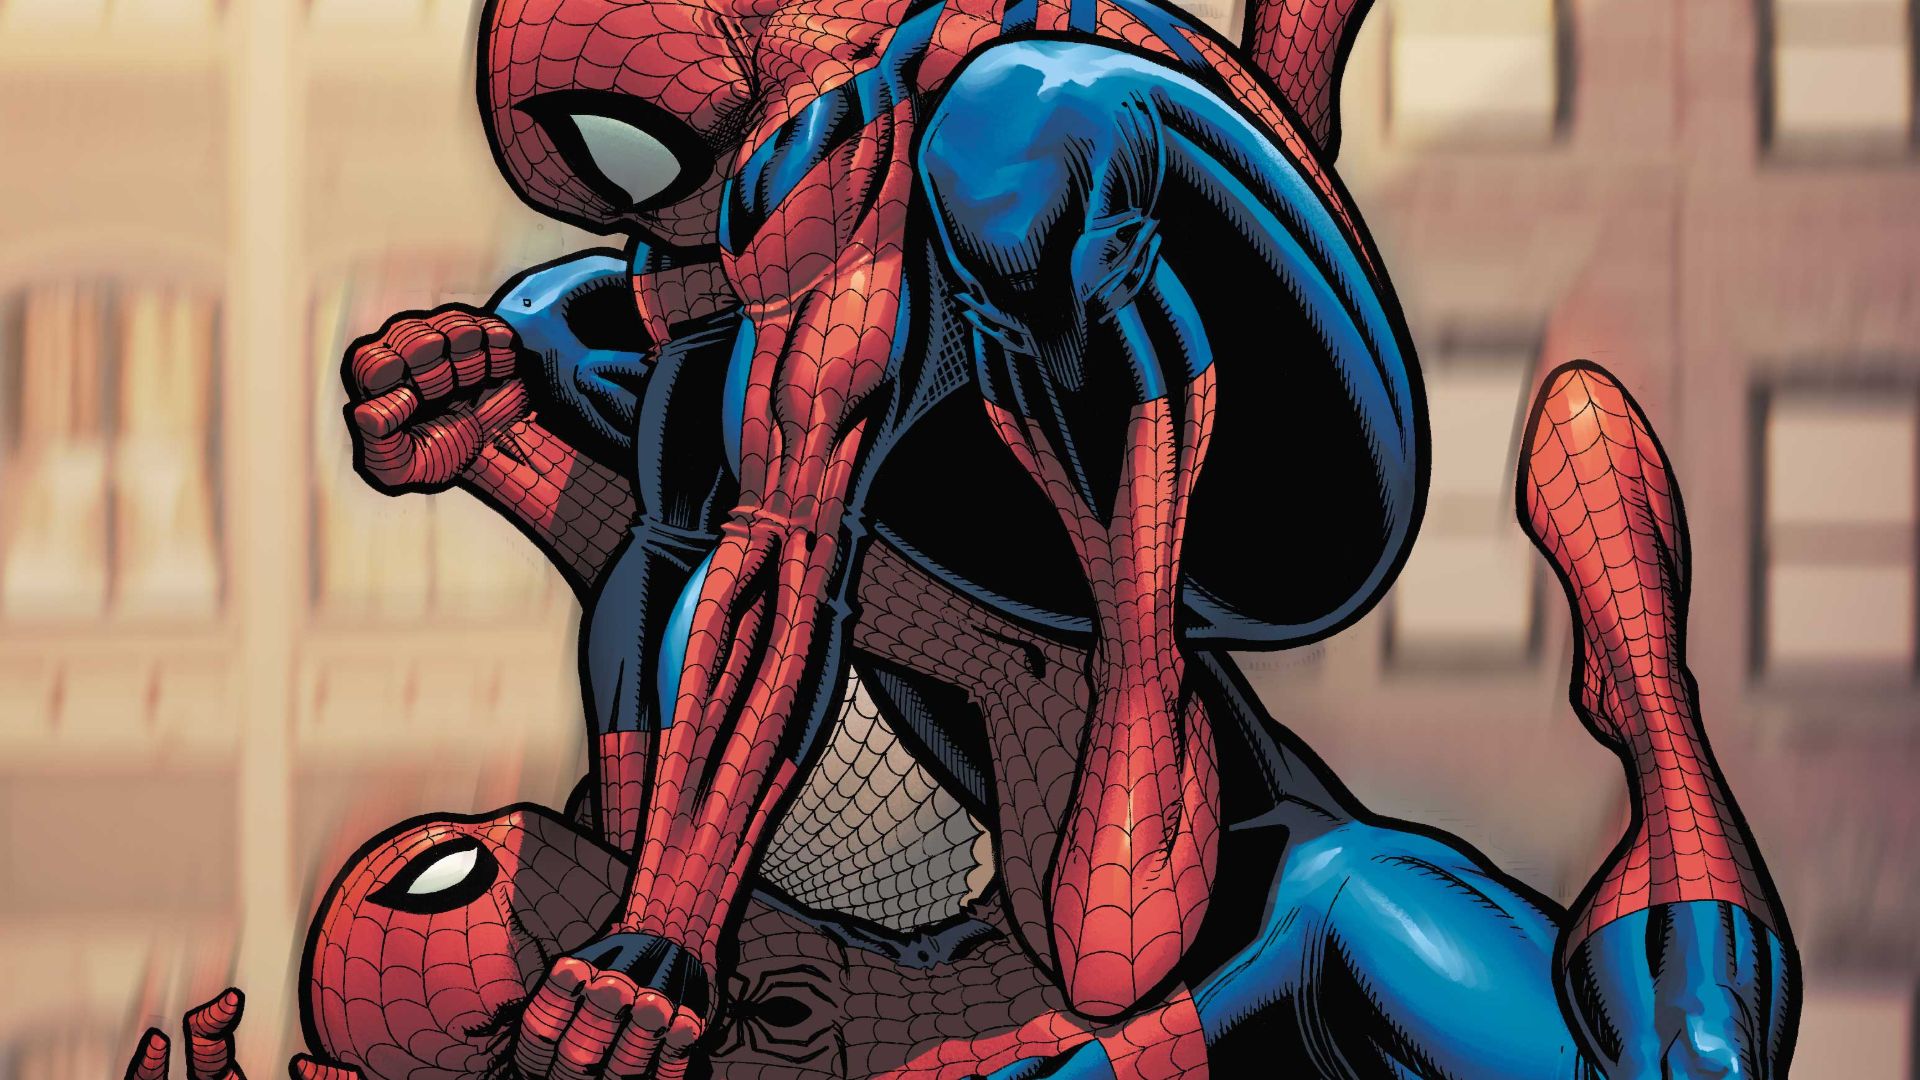 'Amazing Spider-Man' #93 is an end with new beginnings